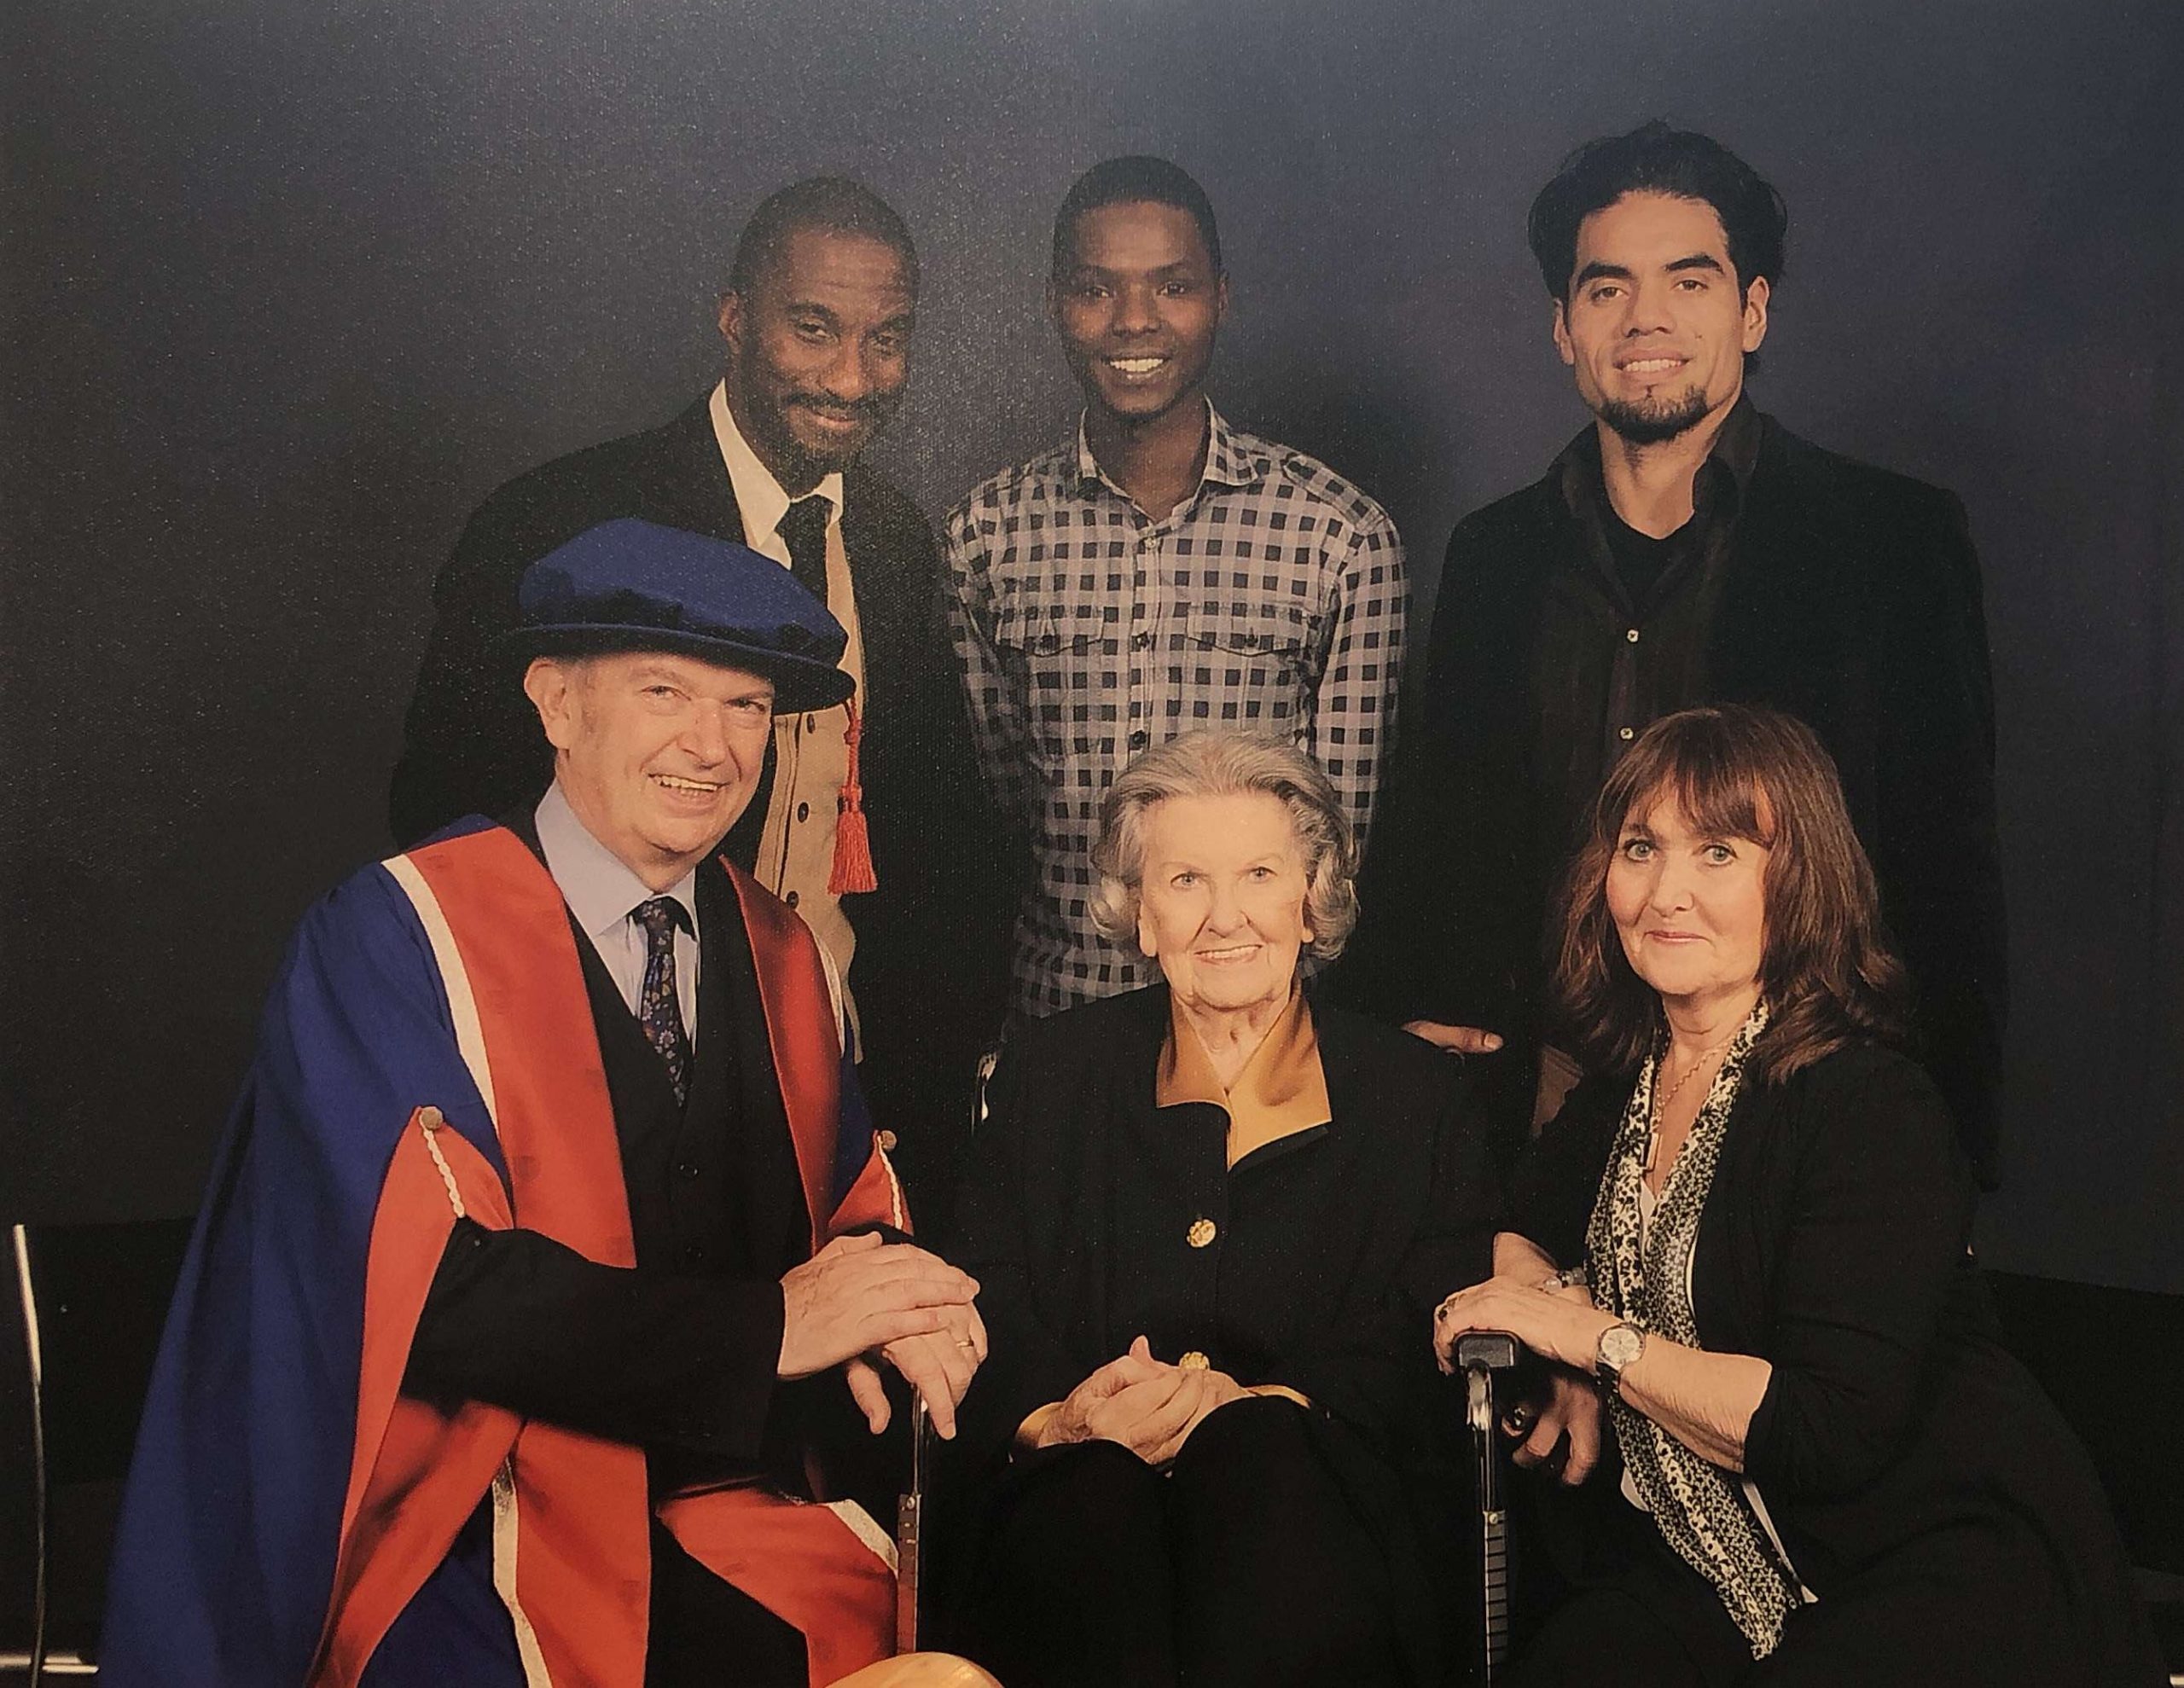 Front row L-R: Philip Hedley, Lois Gould and Yvonne Edgell Back row L-R: Clint Dyer, Fiston Break and Martin Espindola University of East London Honorary Doctorate, 2011